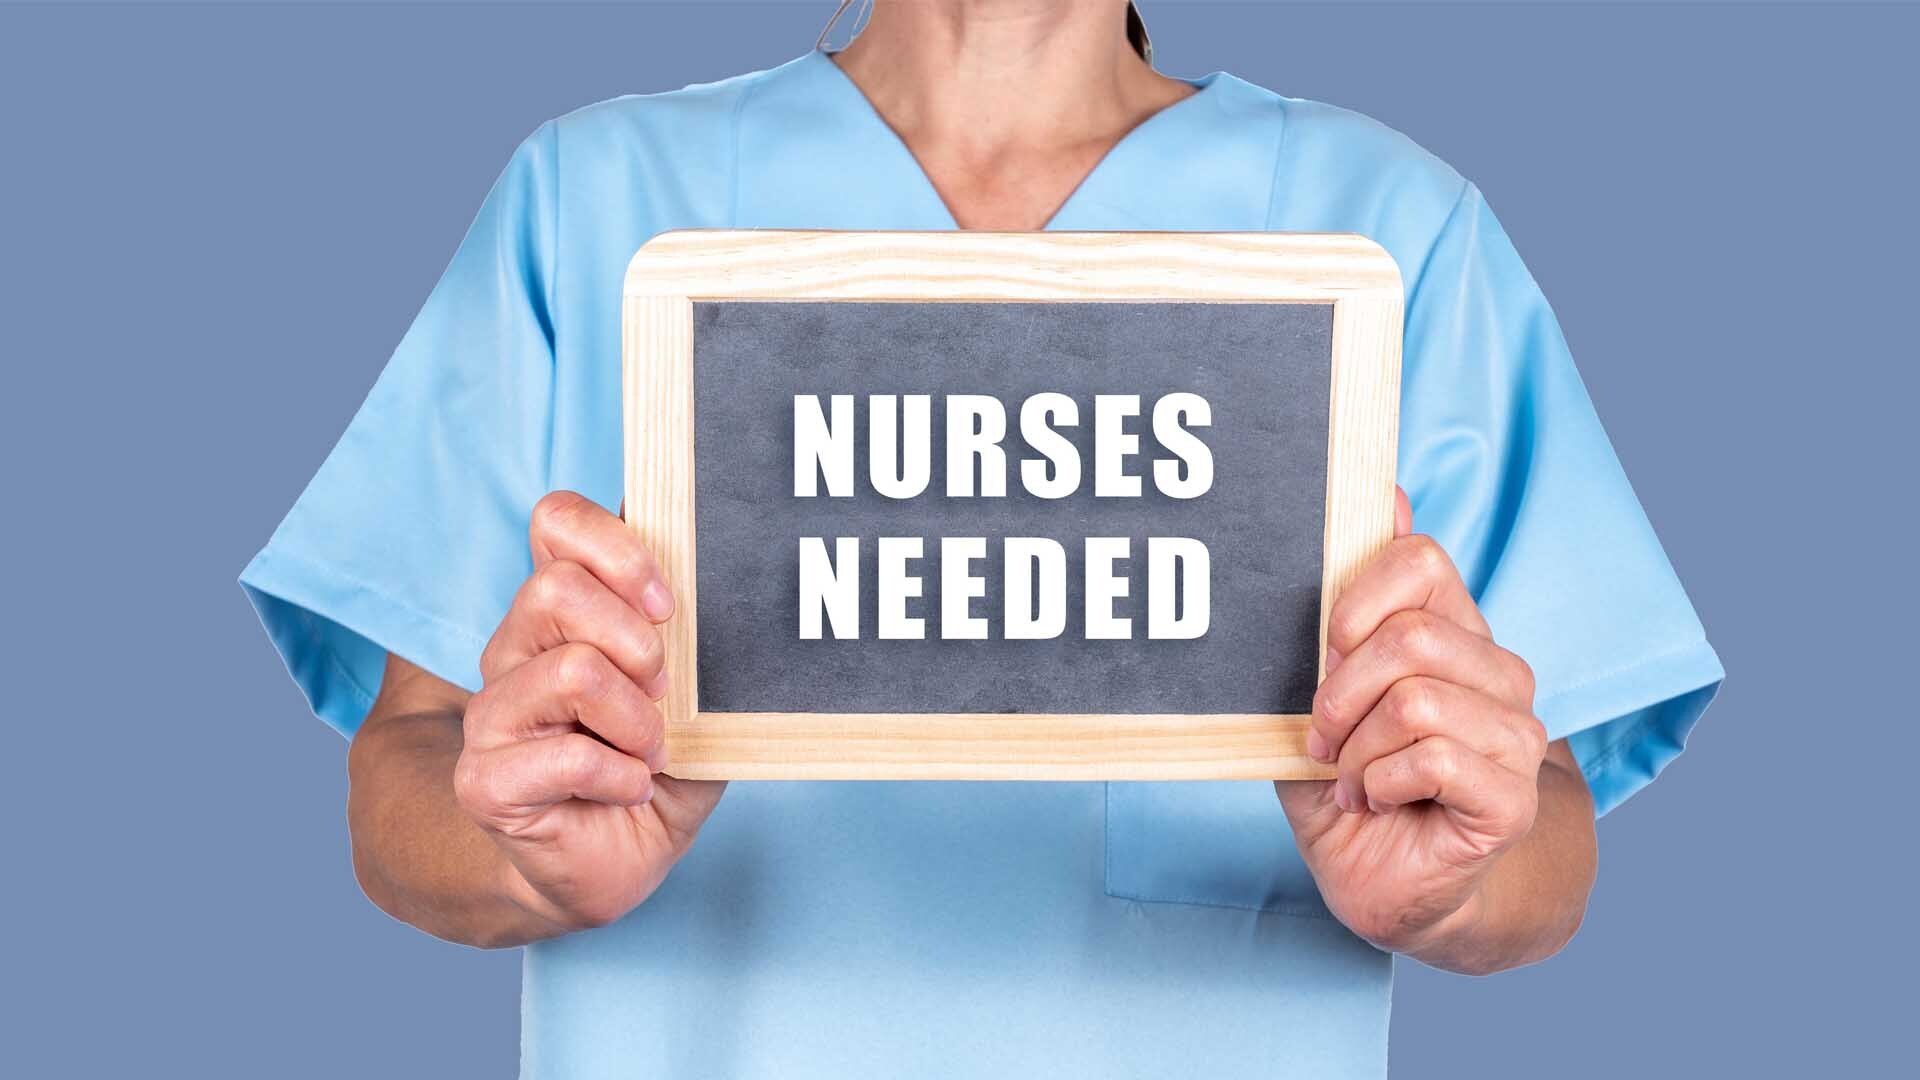 Solutions to Alleviate the Nursing Shortage in Your Hospital